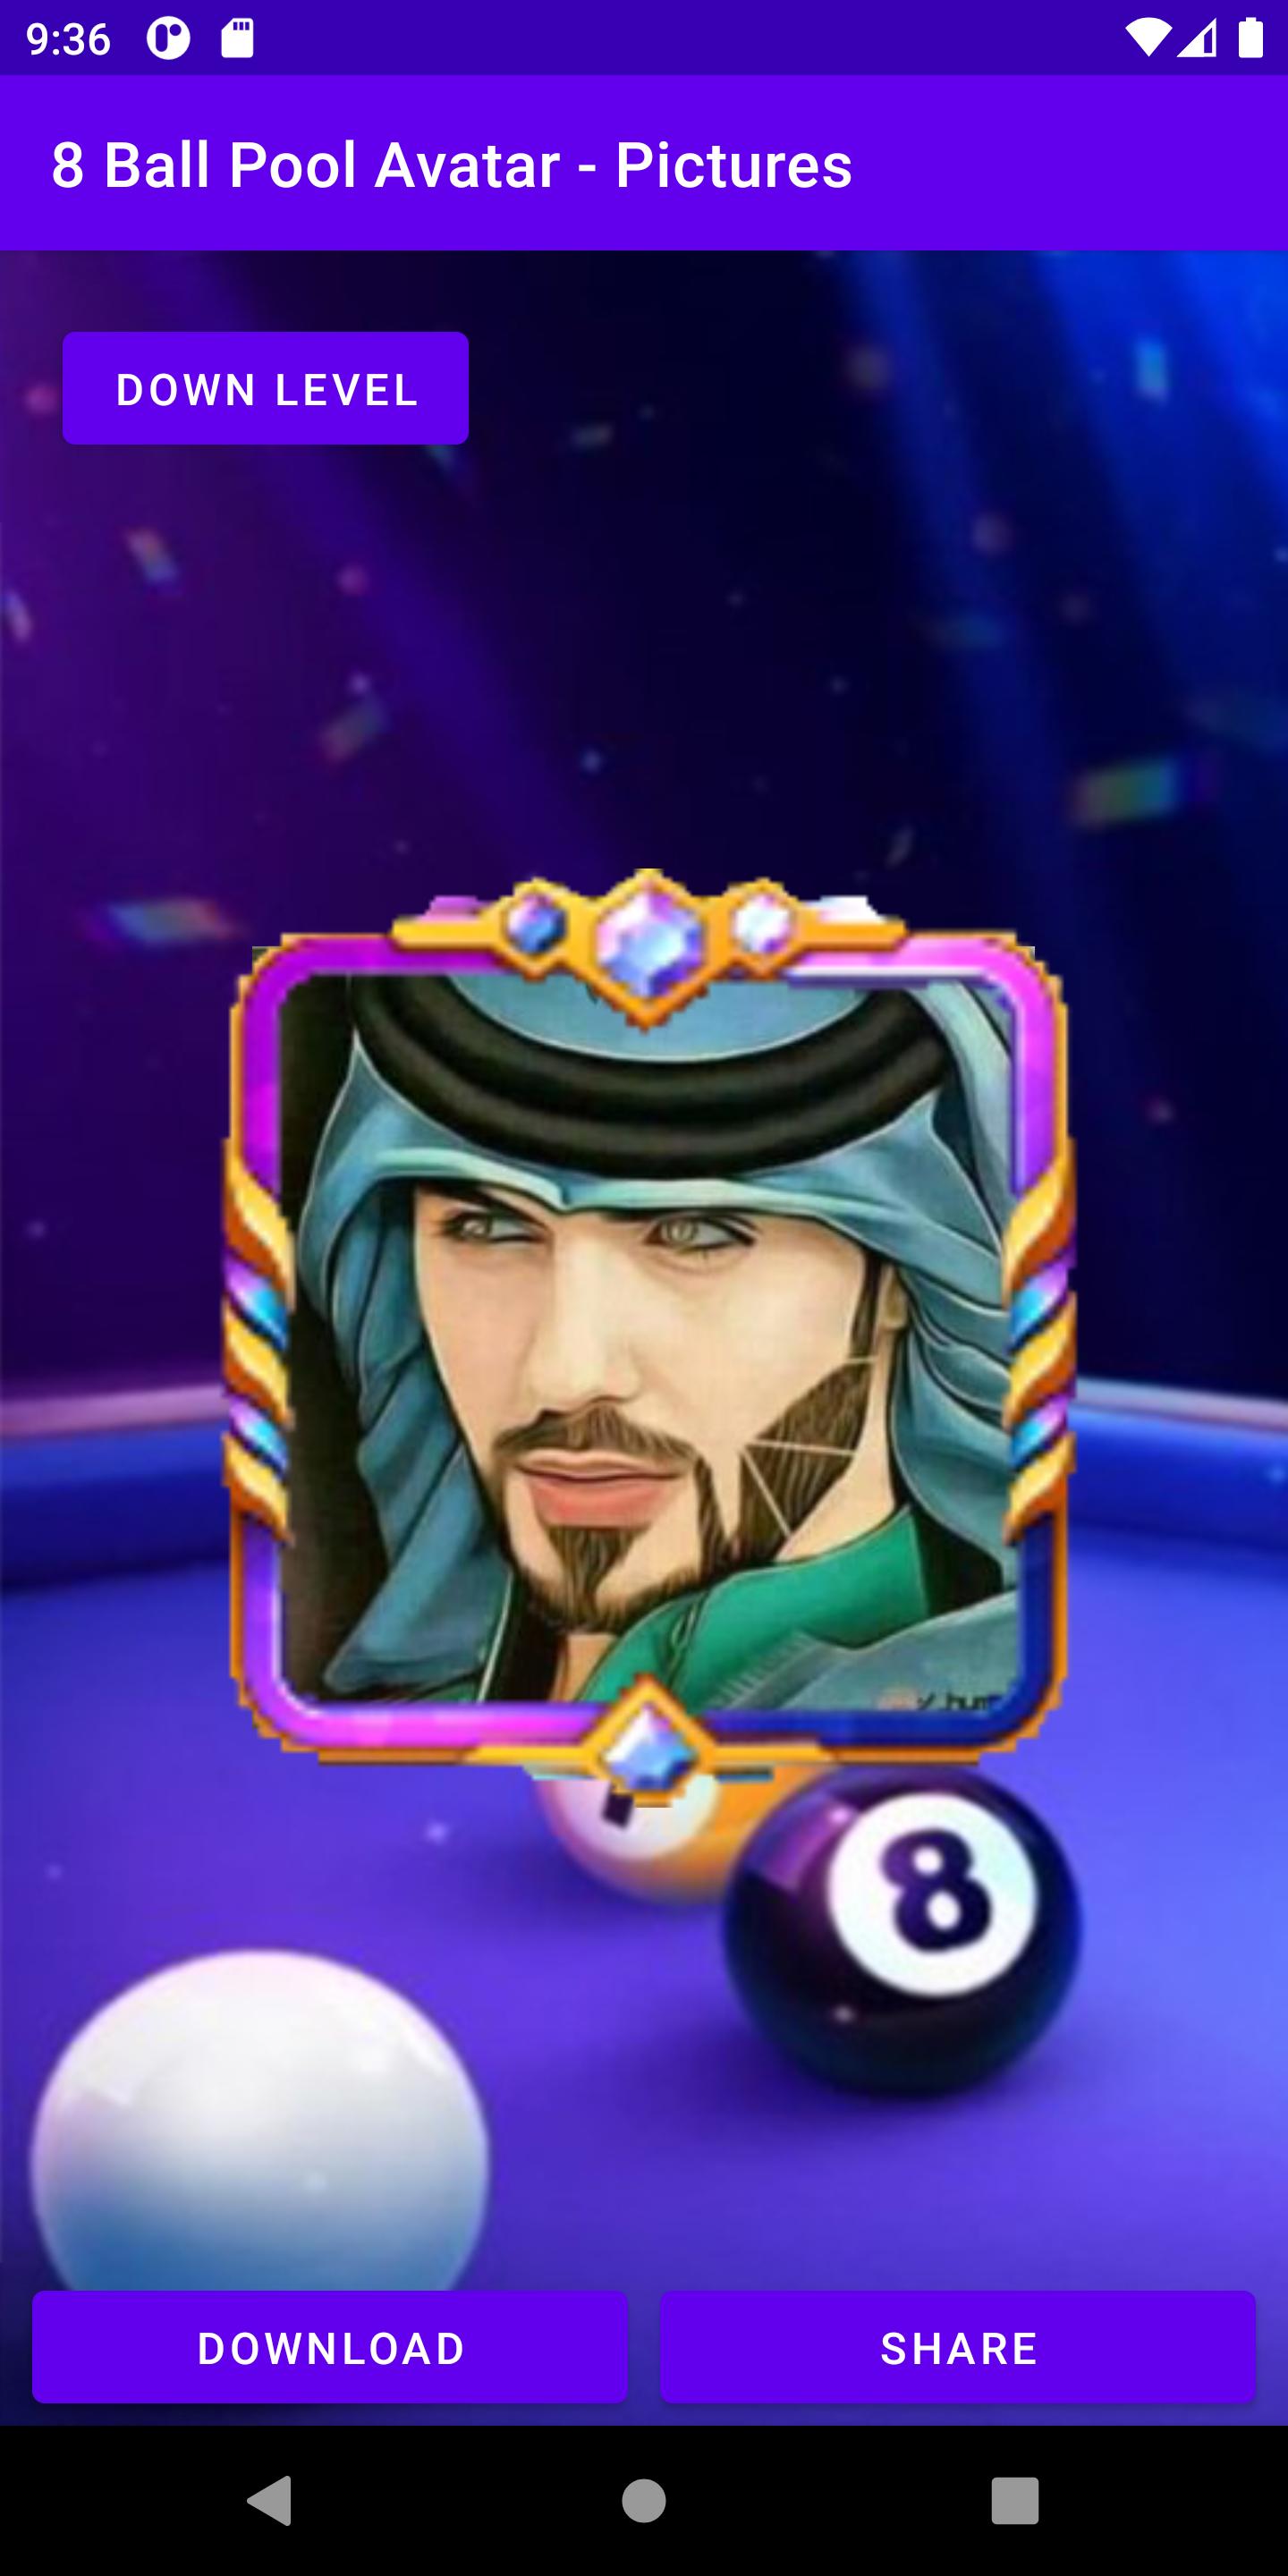 8 Ball Pool Avatar - Pictures for Android - APK Download